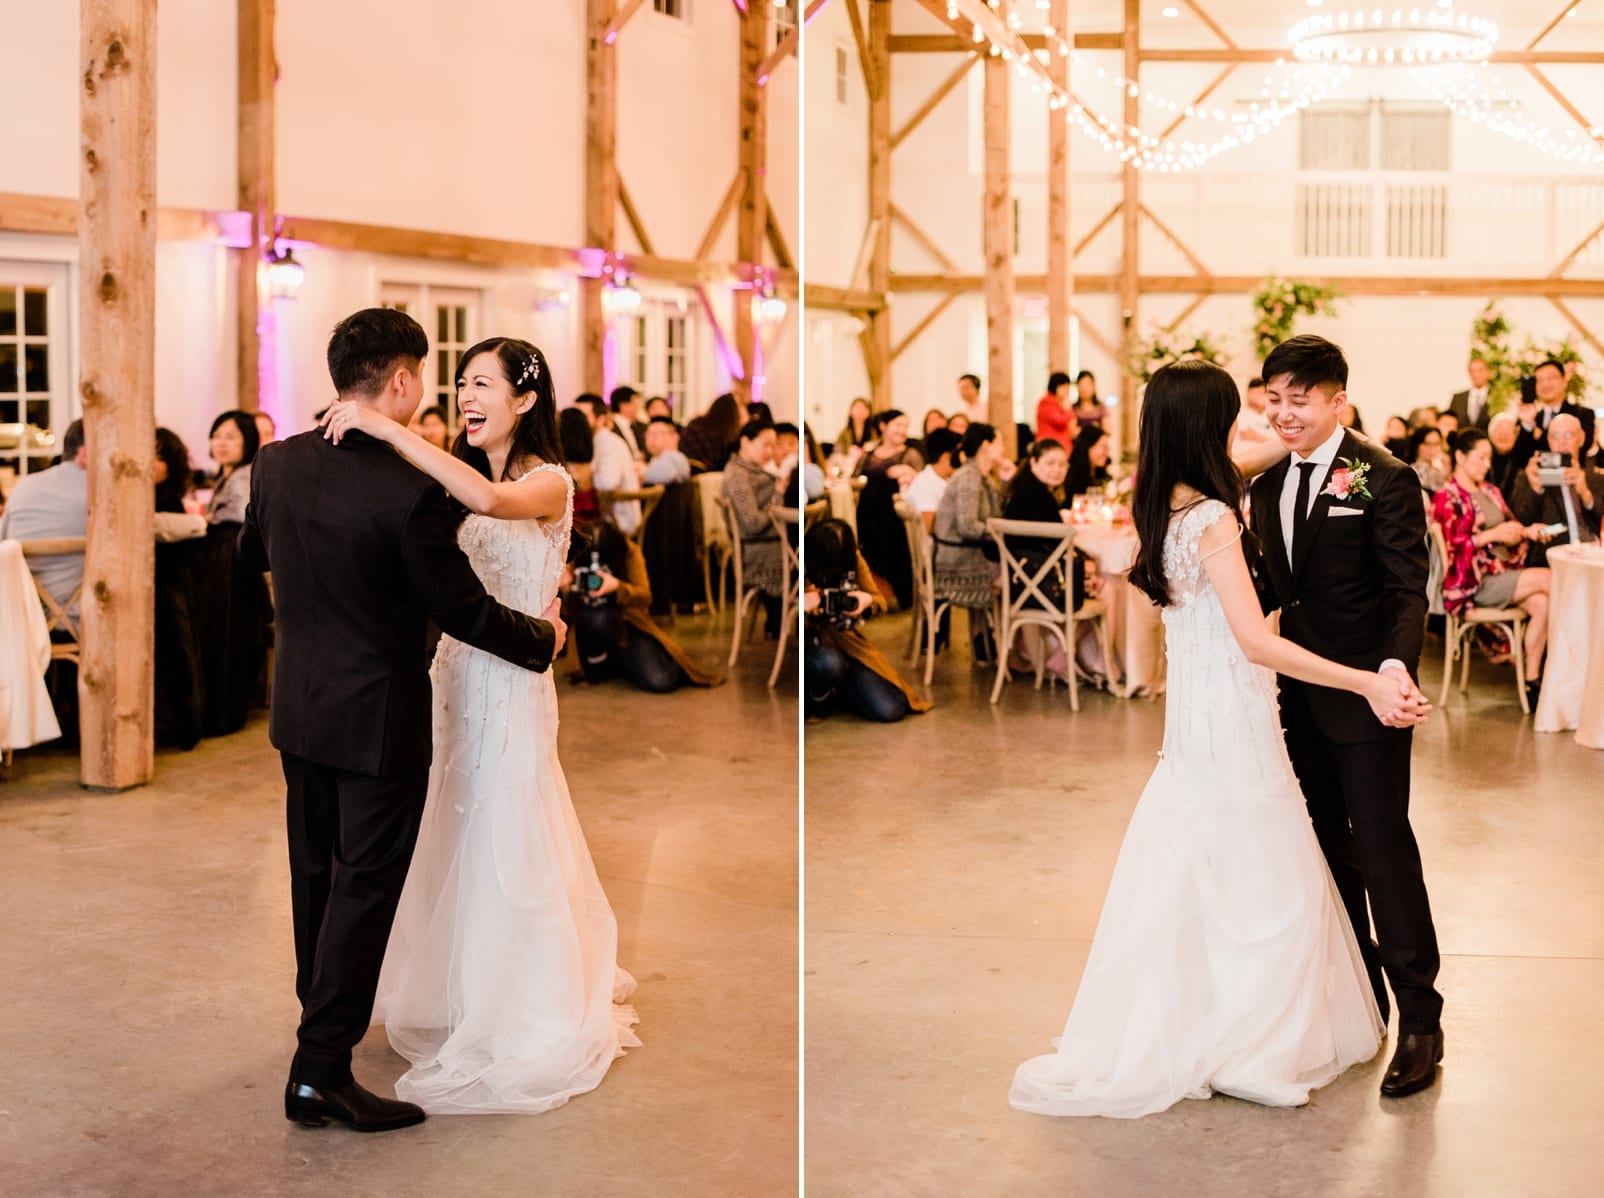 Barn of Chapel Hill bride and groom dancing for first dance photo